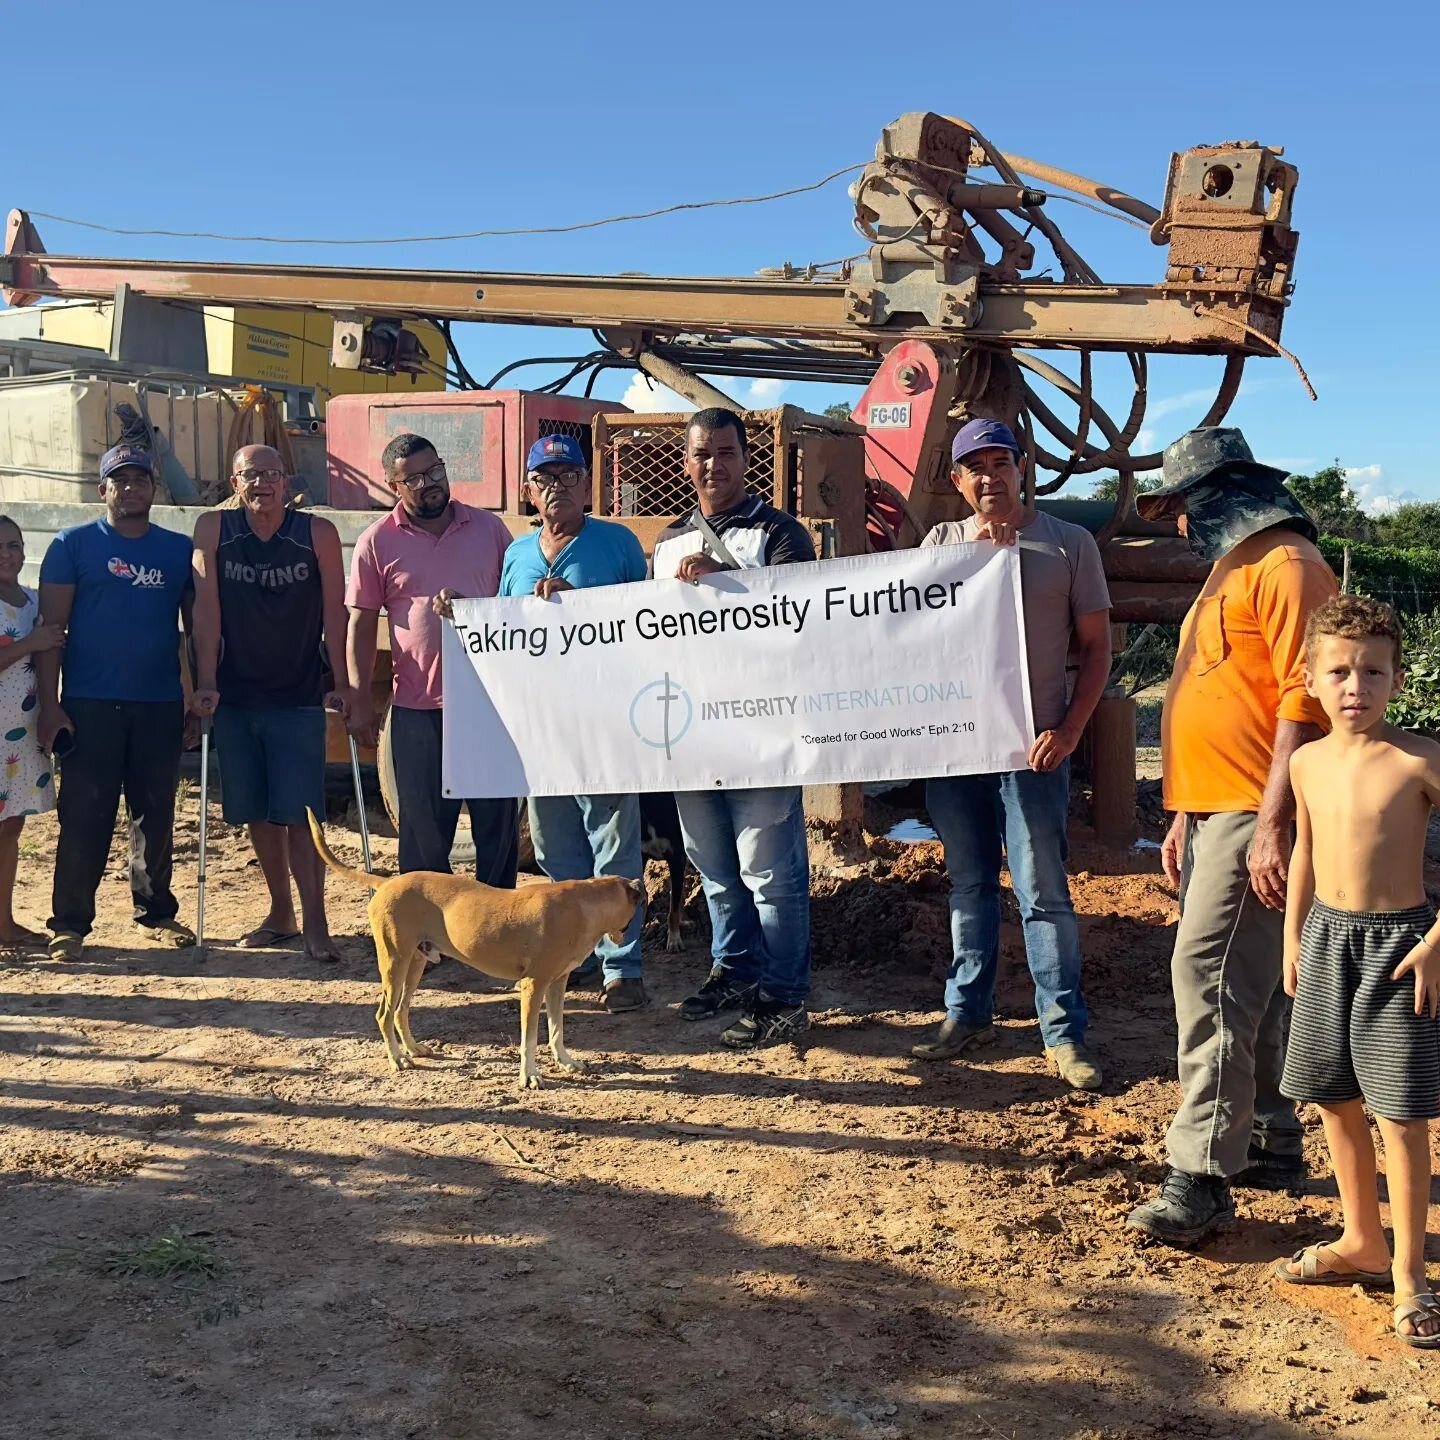 This Brazilian Community is excited to have new access to clean drinking water. Solar panels will be installed soon  to provide the power to pump.